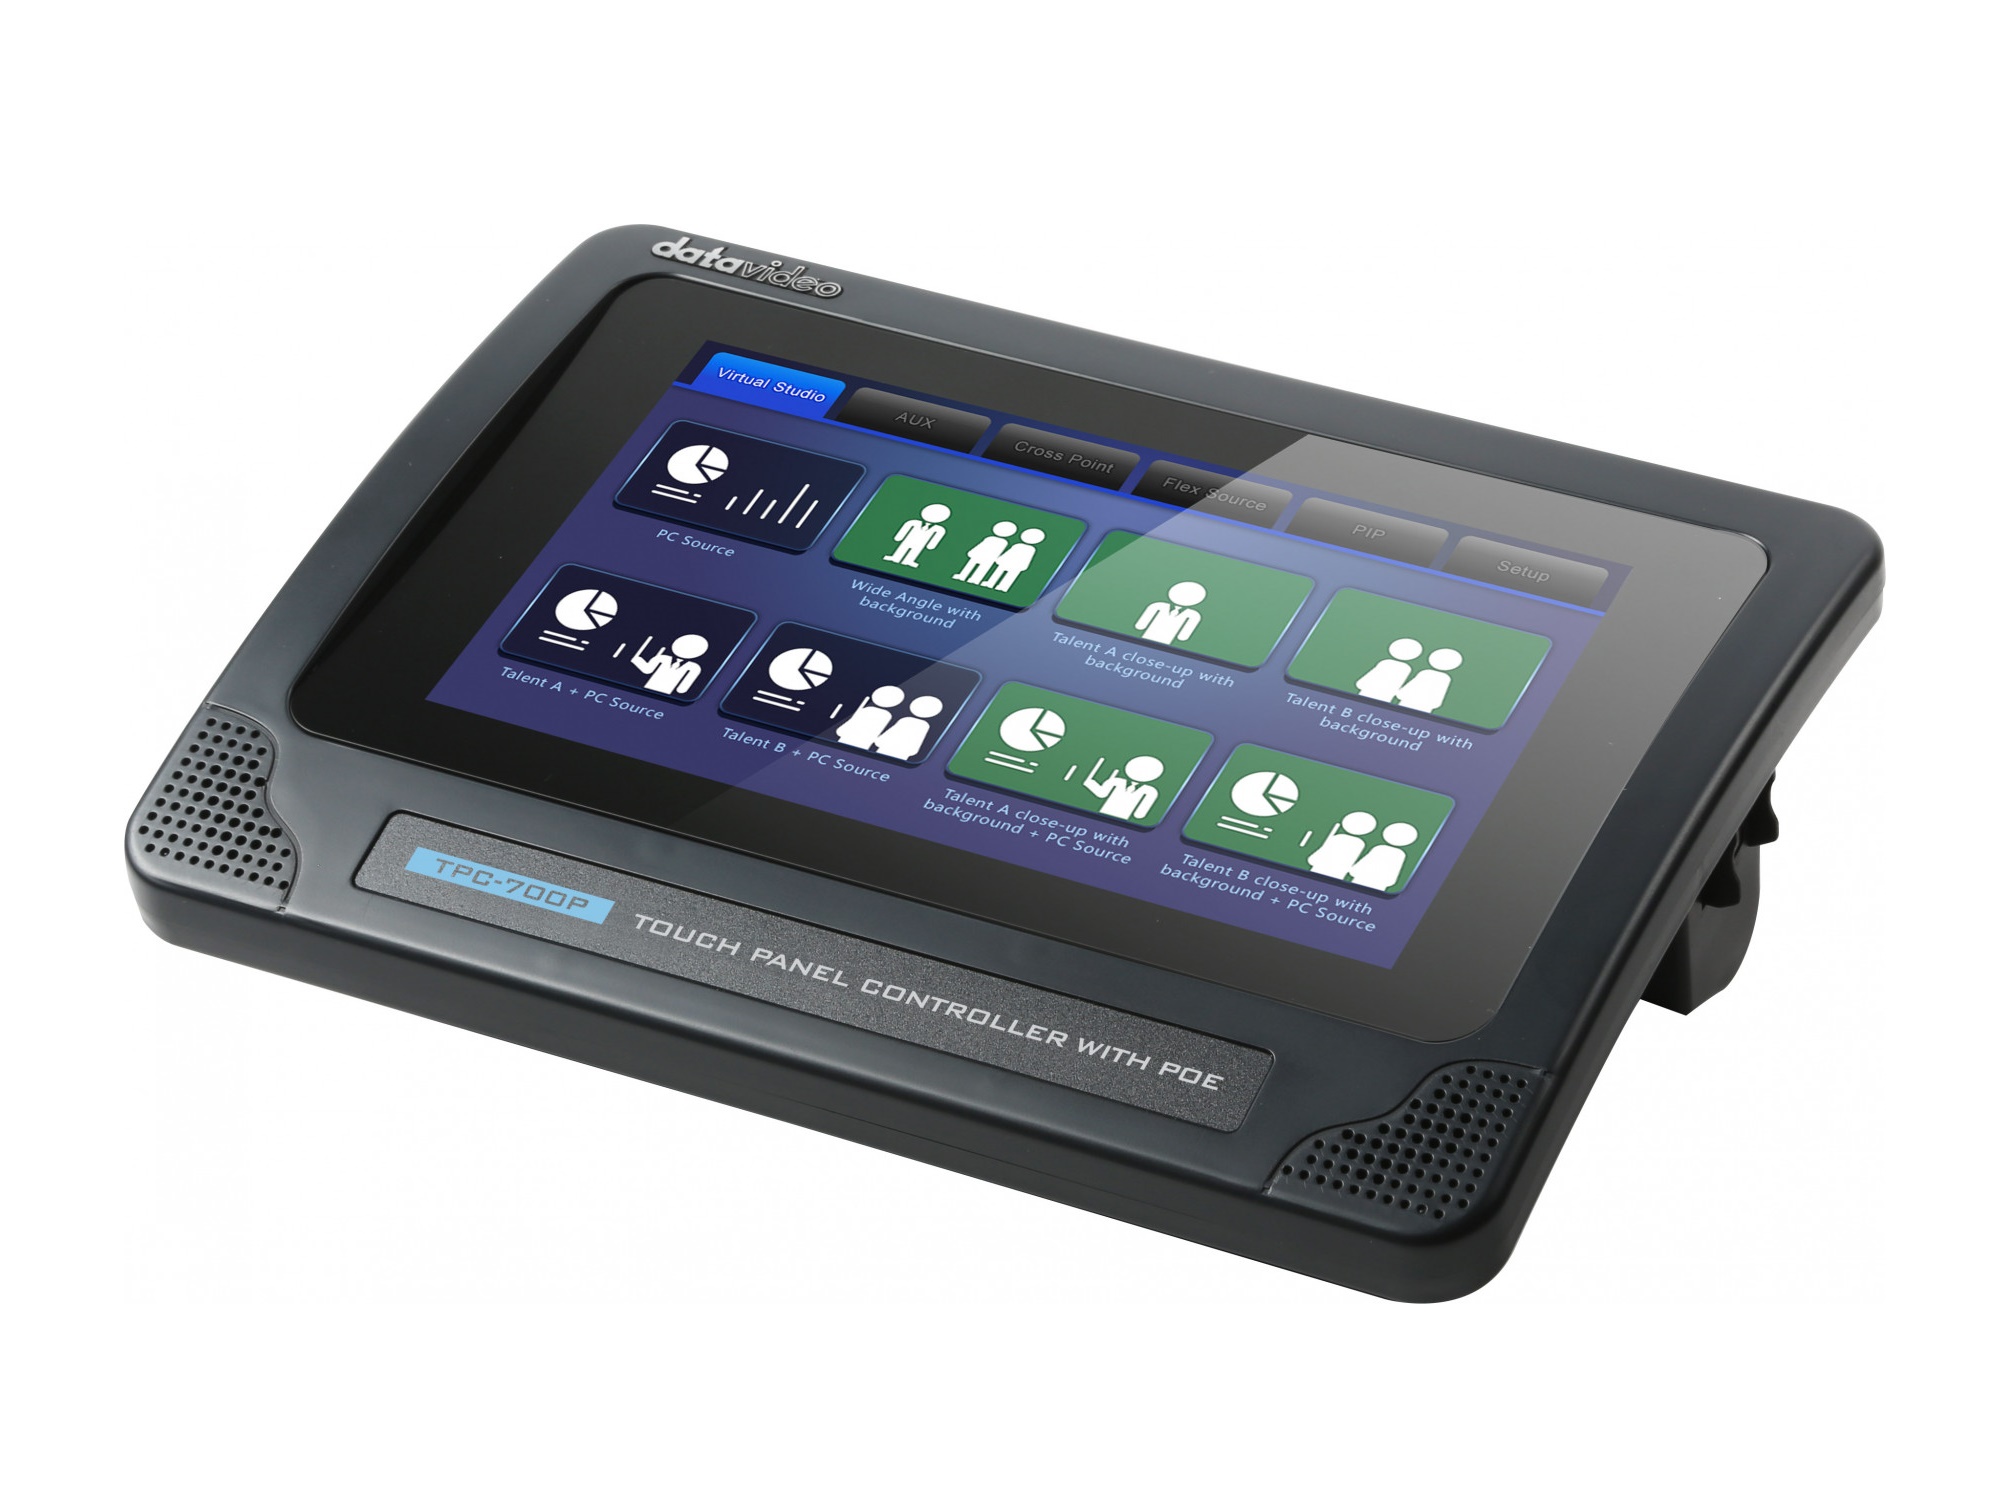 TPC-700P Touch Panel Controller with PoE by Datavideo